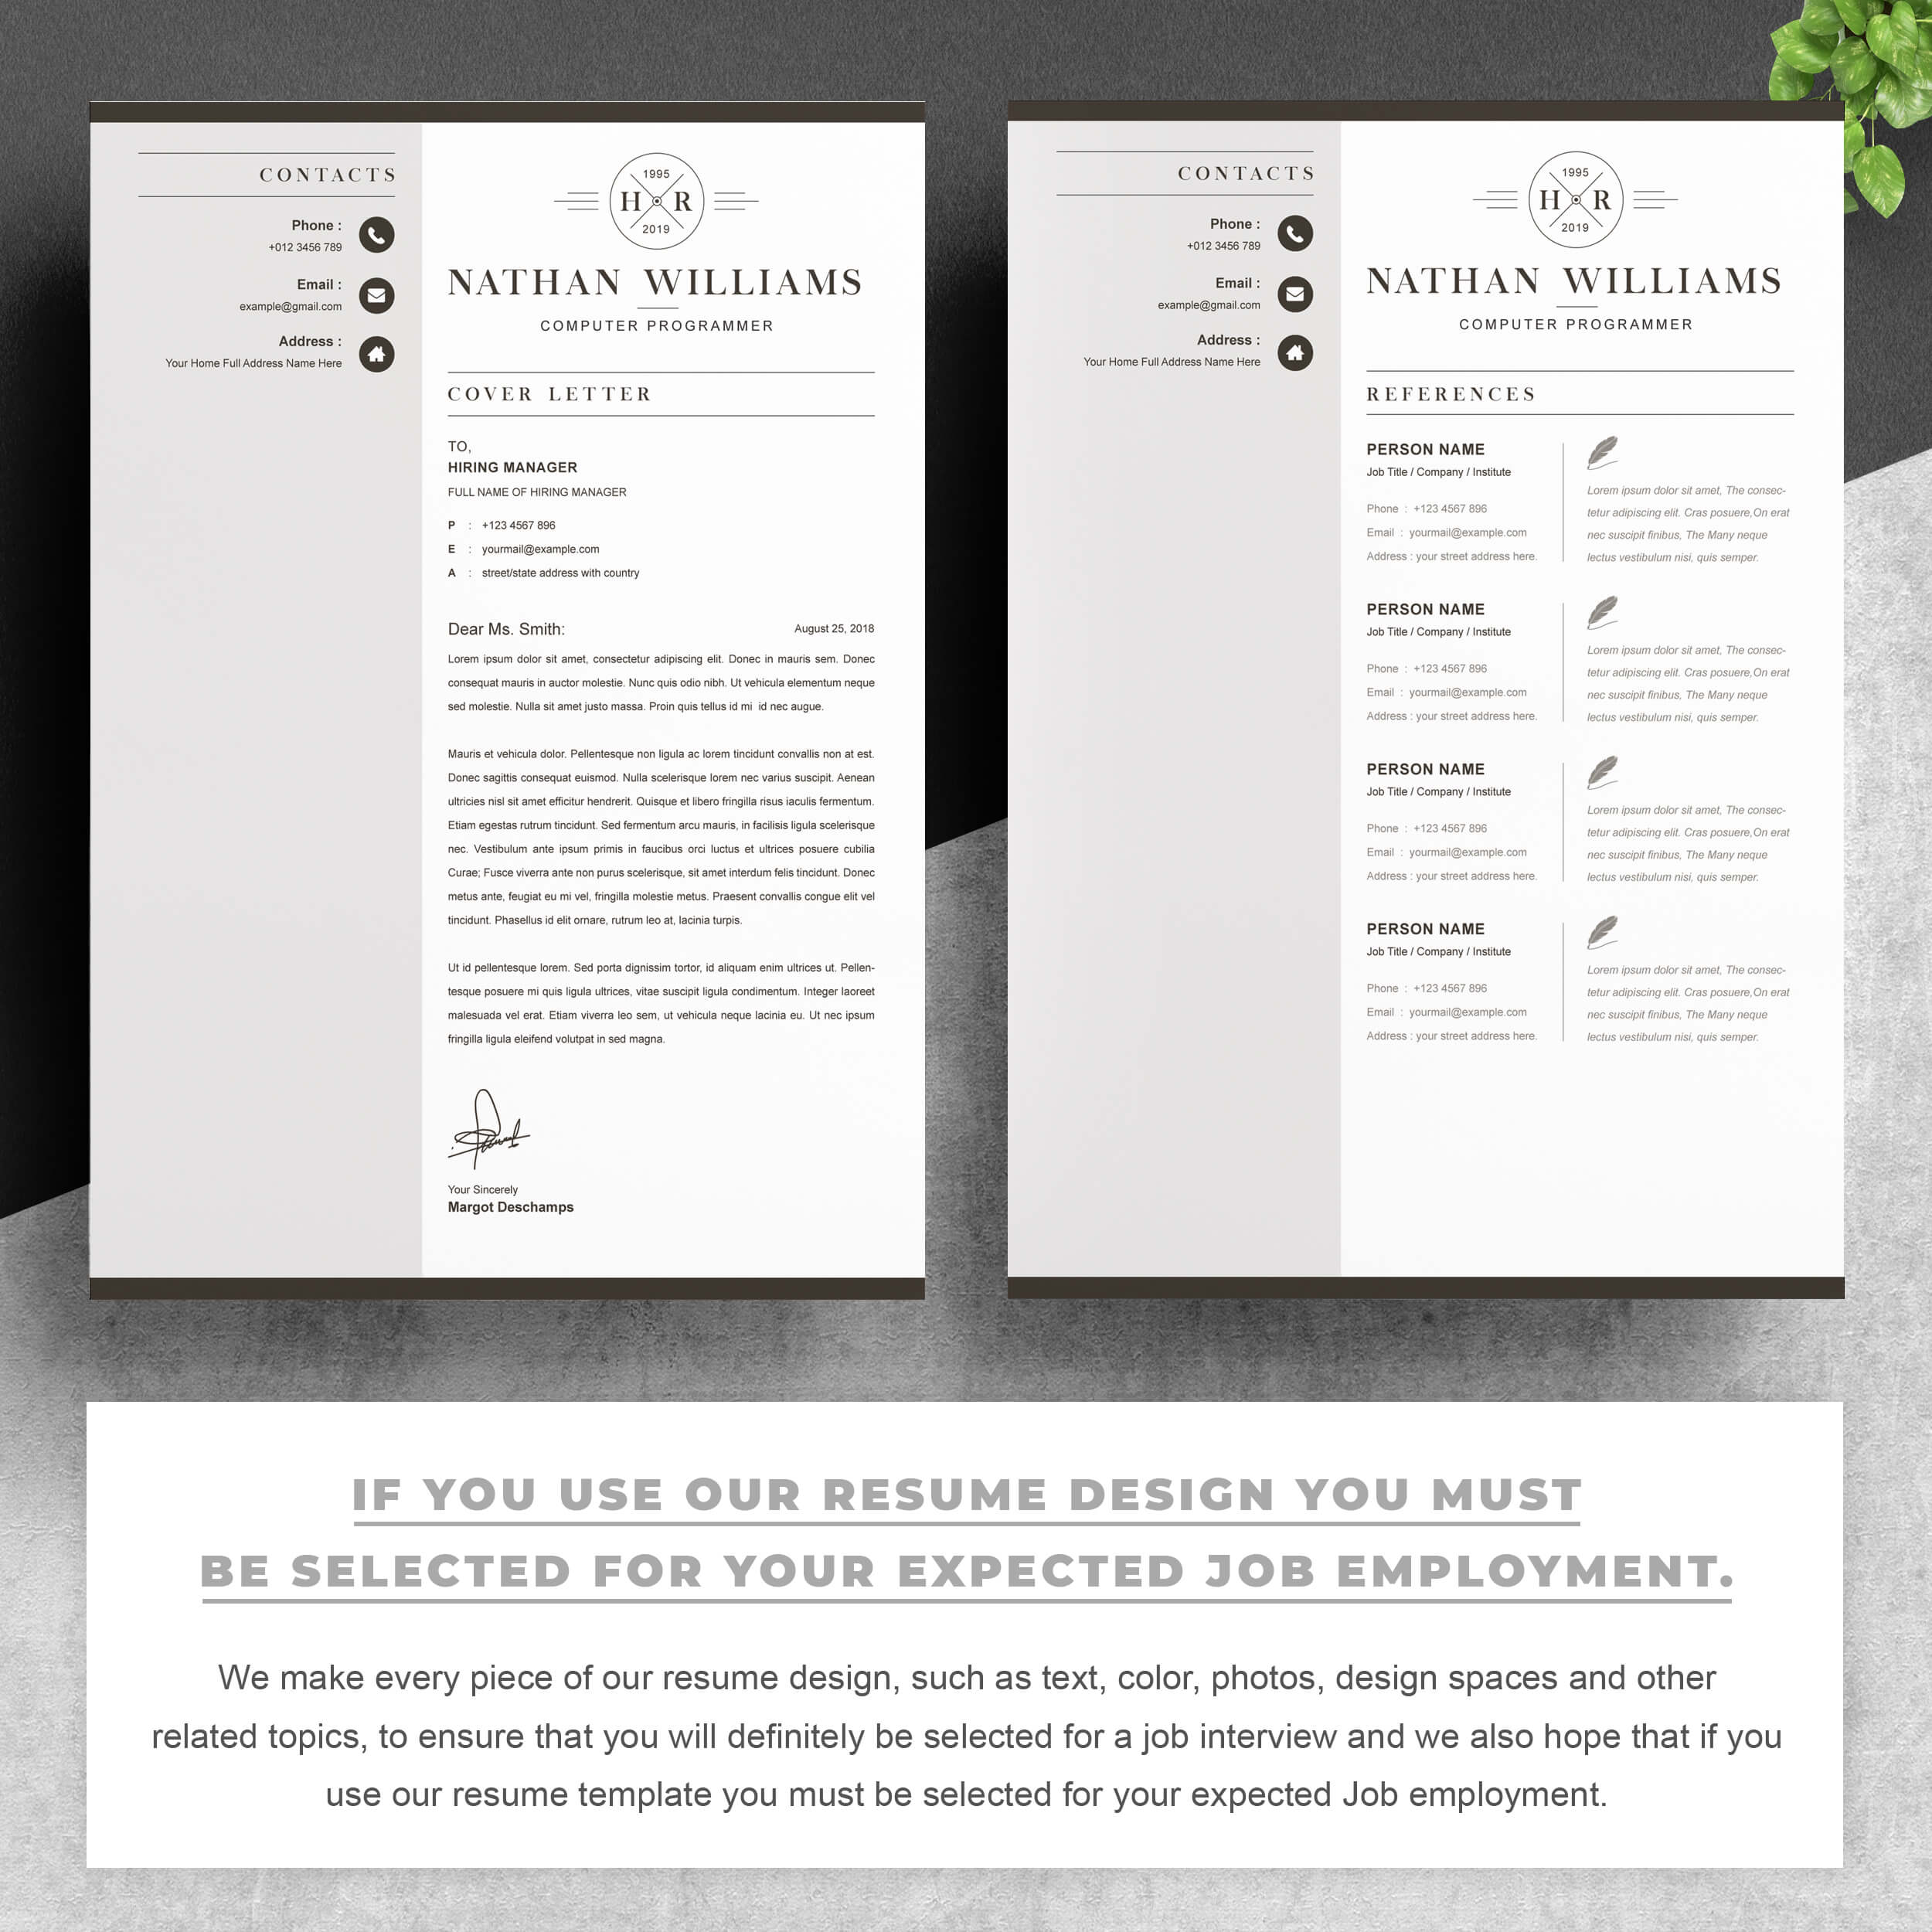 03 2 pages free resume design template copy 327